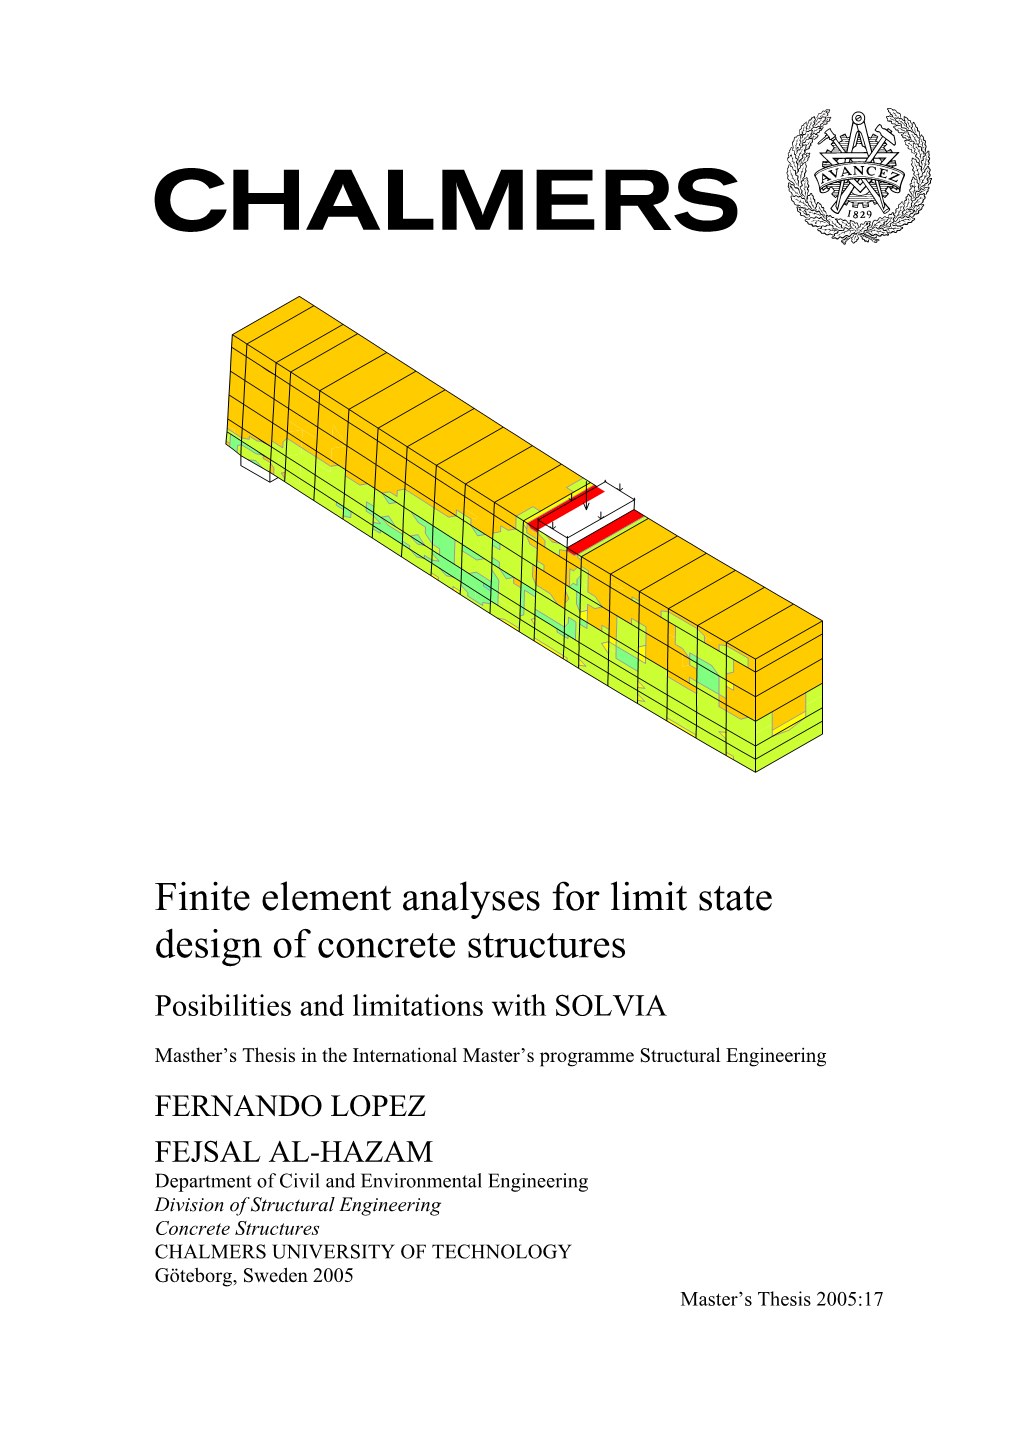 Finite Element Analyses for Limit State Design of Concrete Structures Posibilities and Limitations with SOLVIA